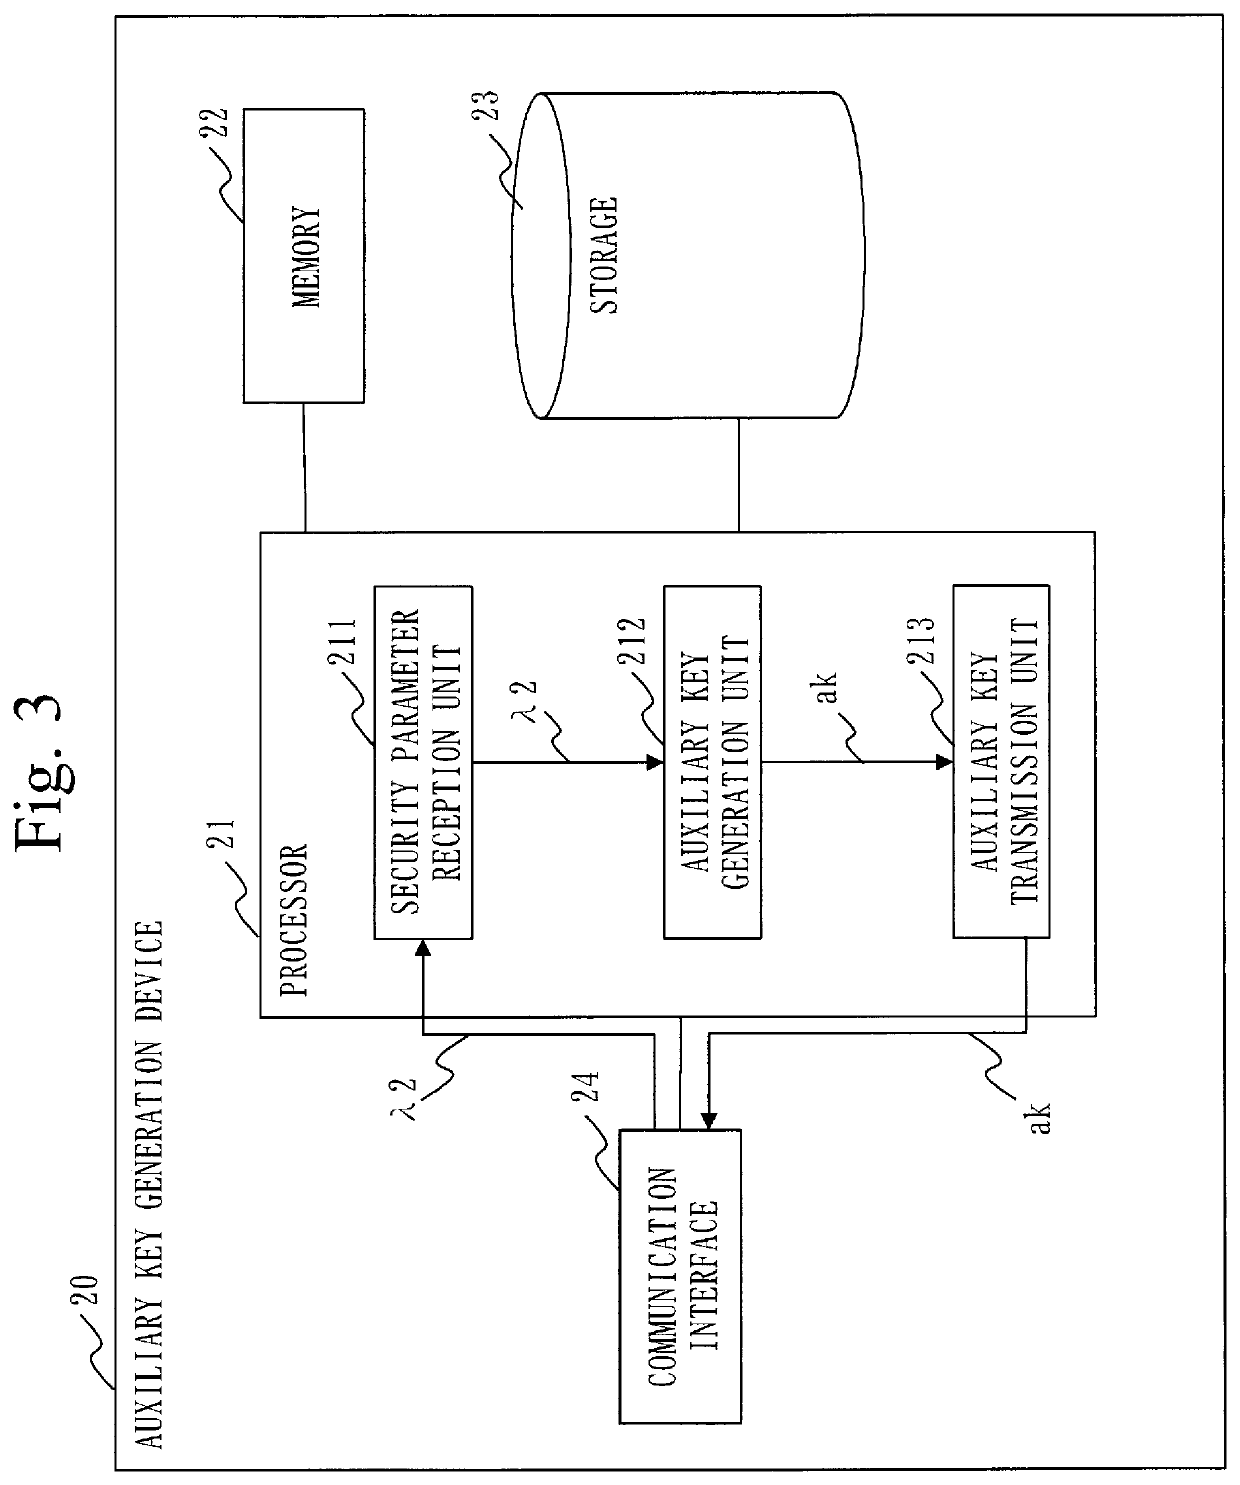 Search device, tag generation device, query generation device, searchable encryption system and computer readable medium